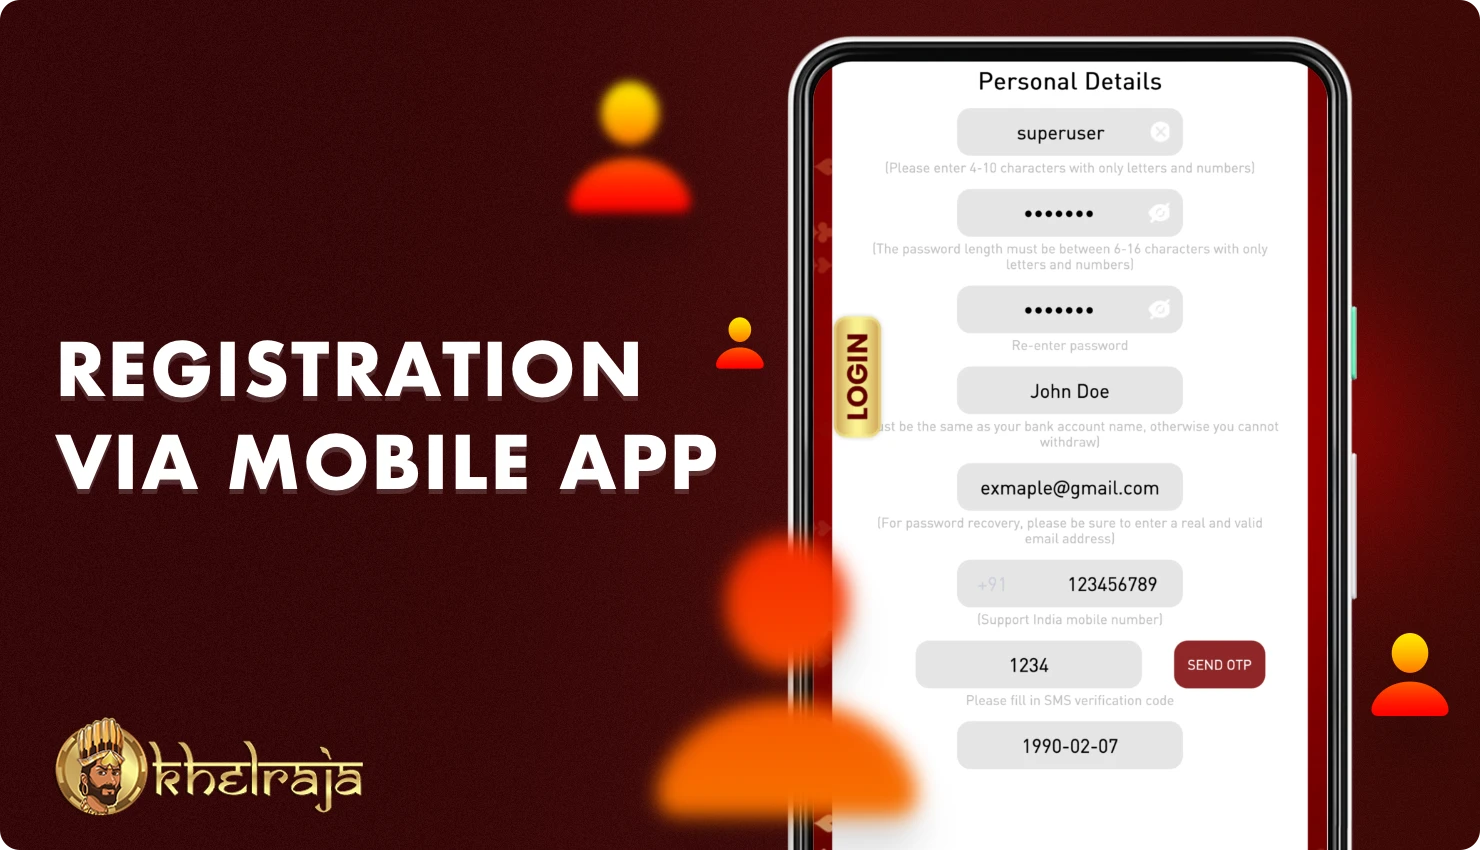 Users from India can use the free Khelraja app to register on the platform